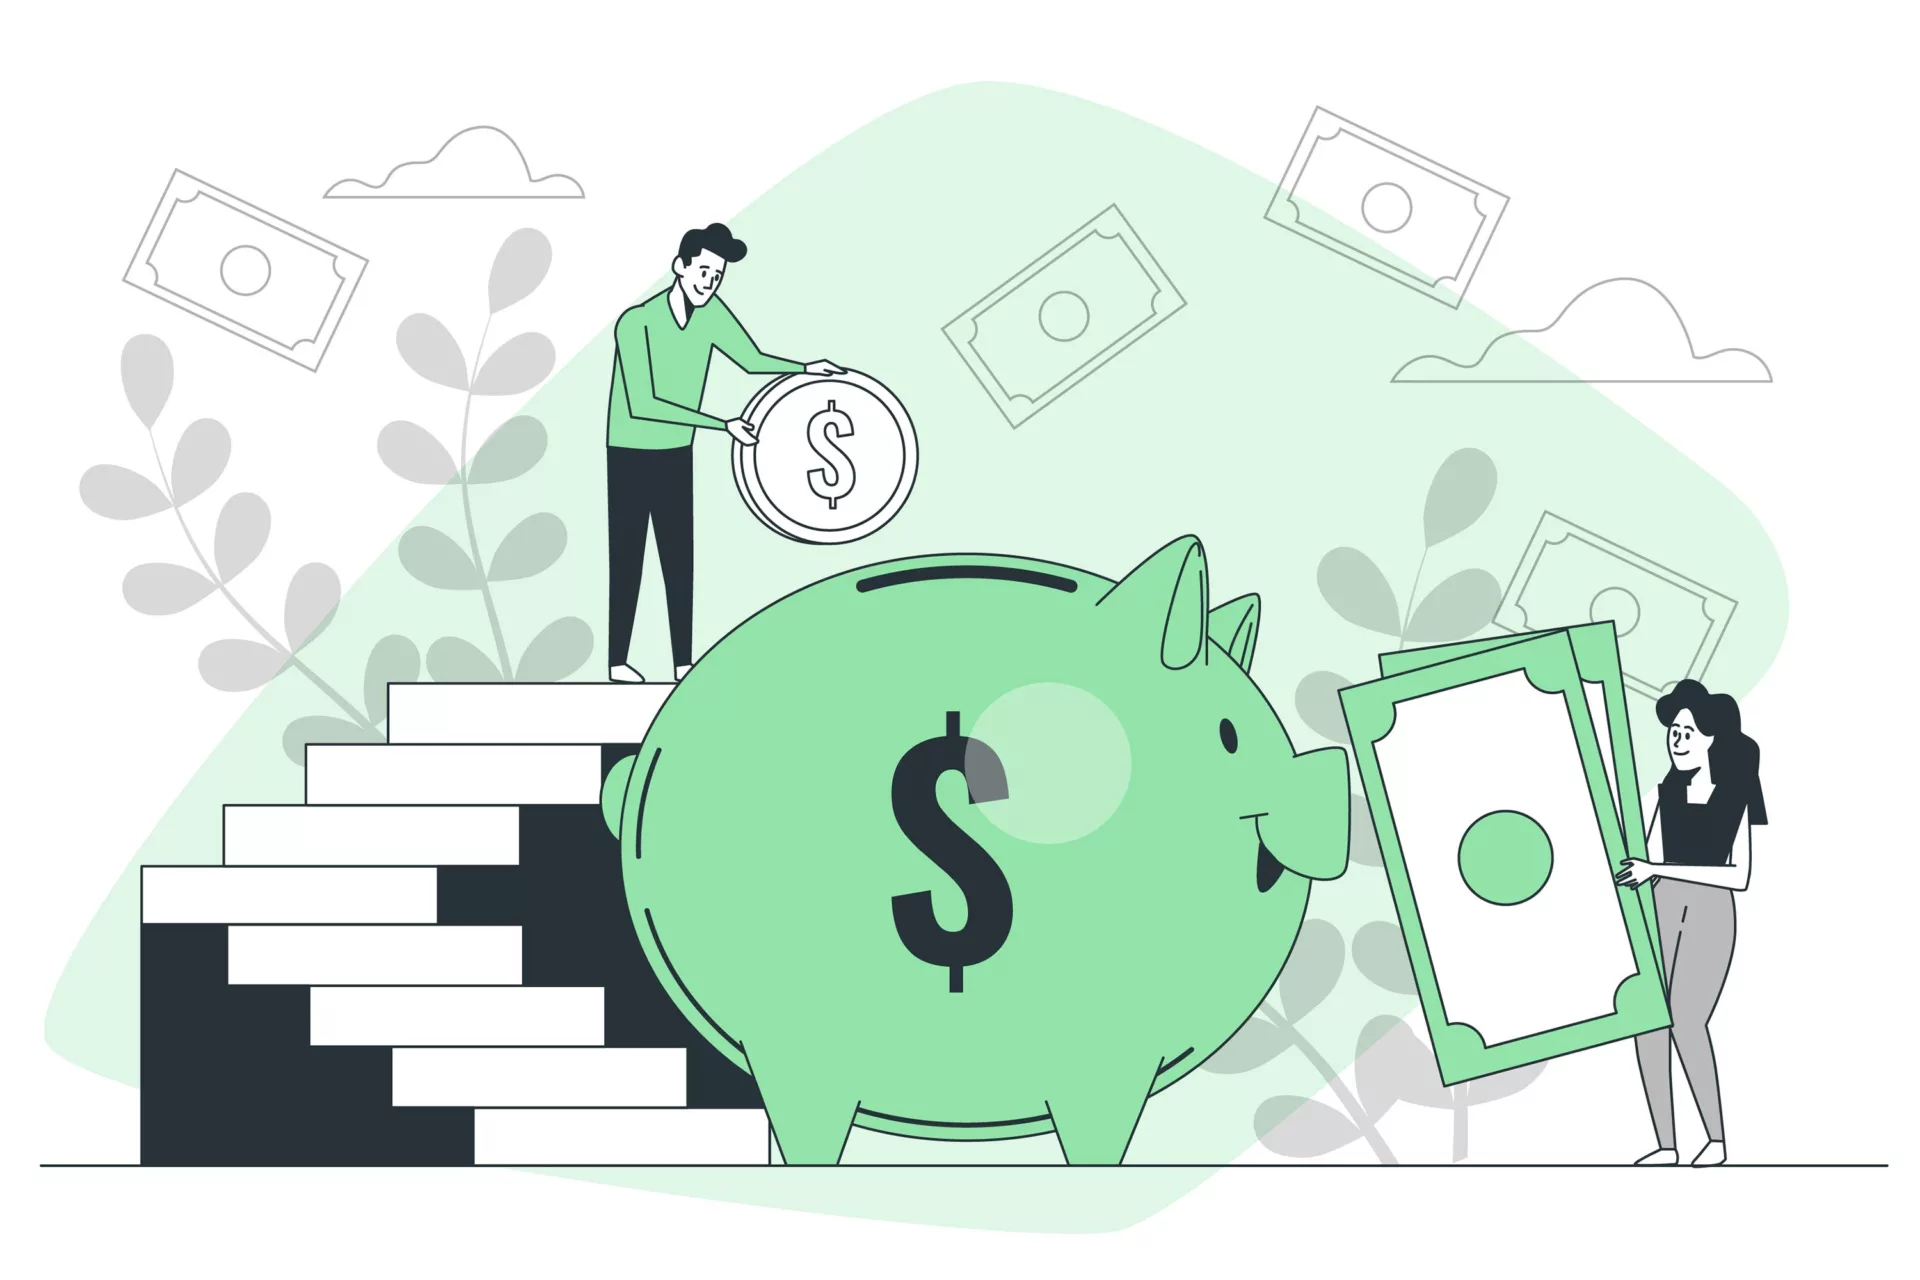 Illustration of two people putting money into a piggy bank